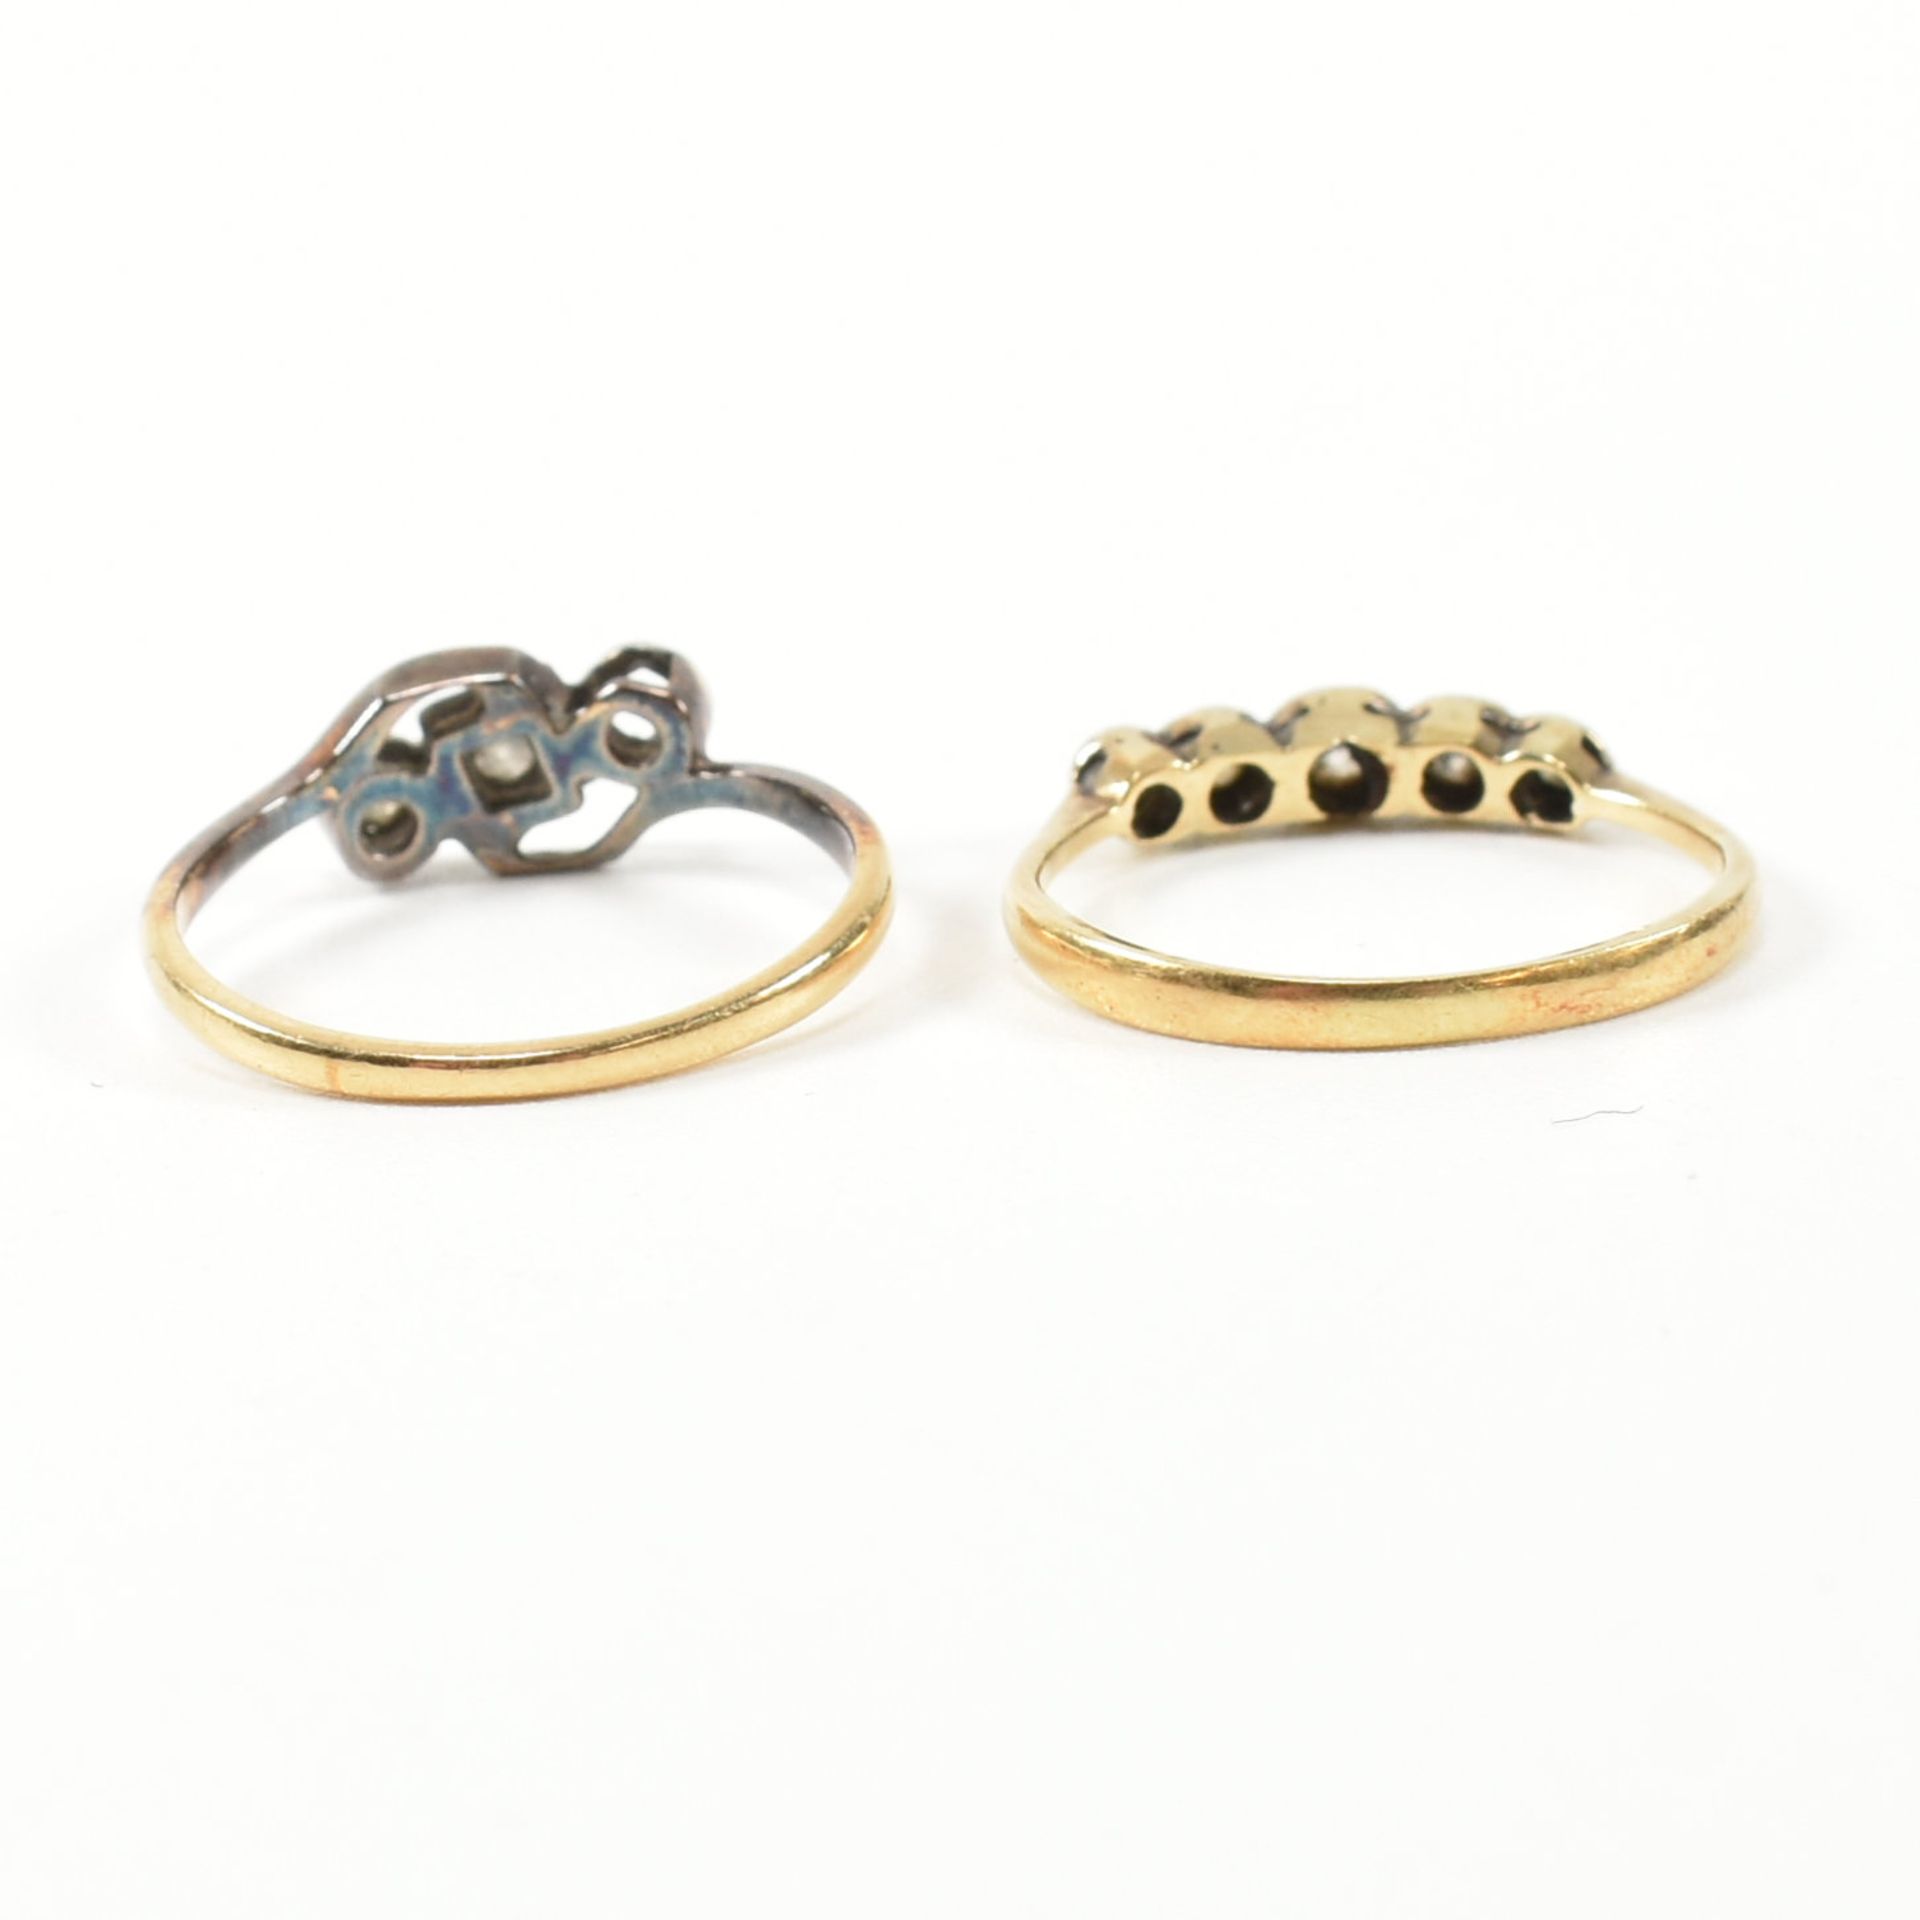 TWO 18CT GOLD & DIAMOND RINGS - Image 5 of 8